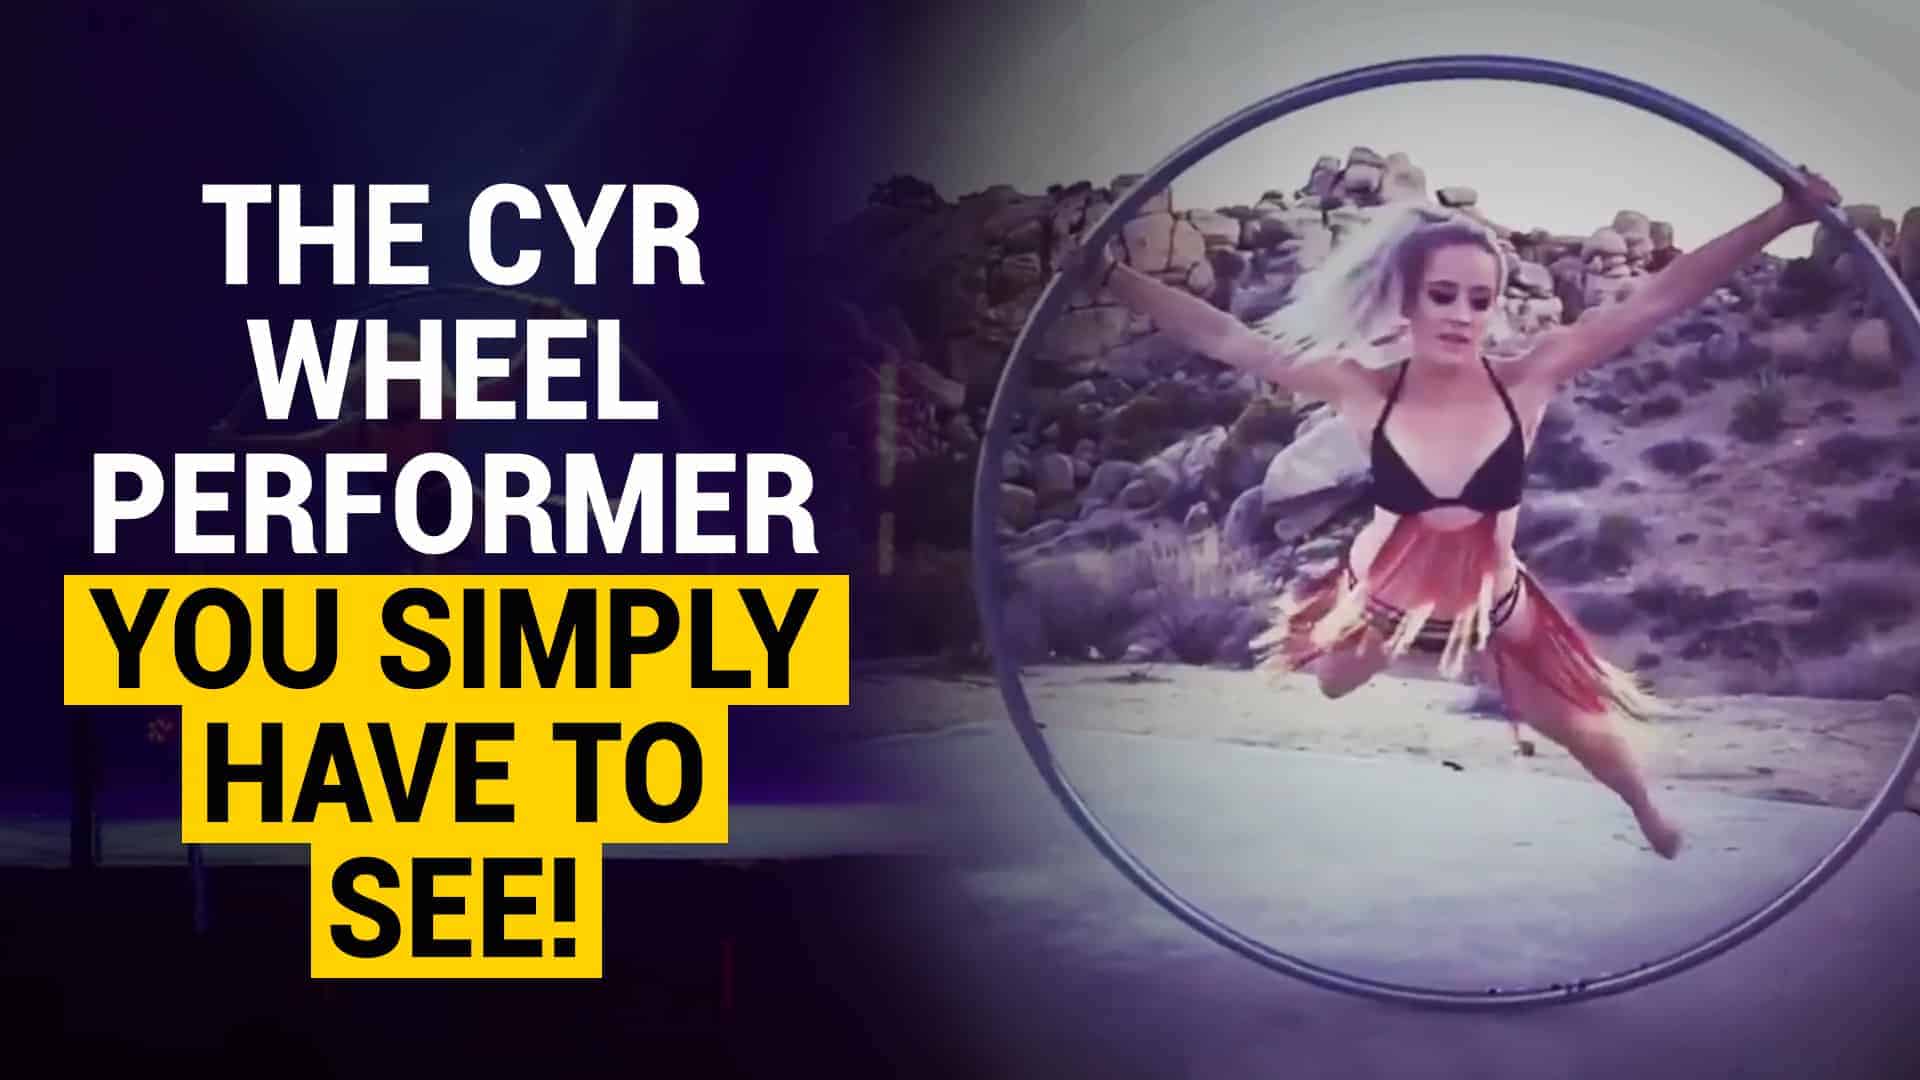 Meet the Queen of the Cyr Wheel (MUST SEE!)